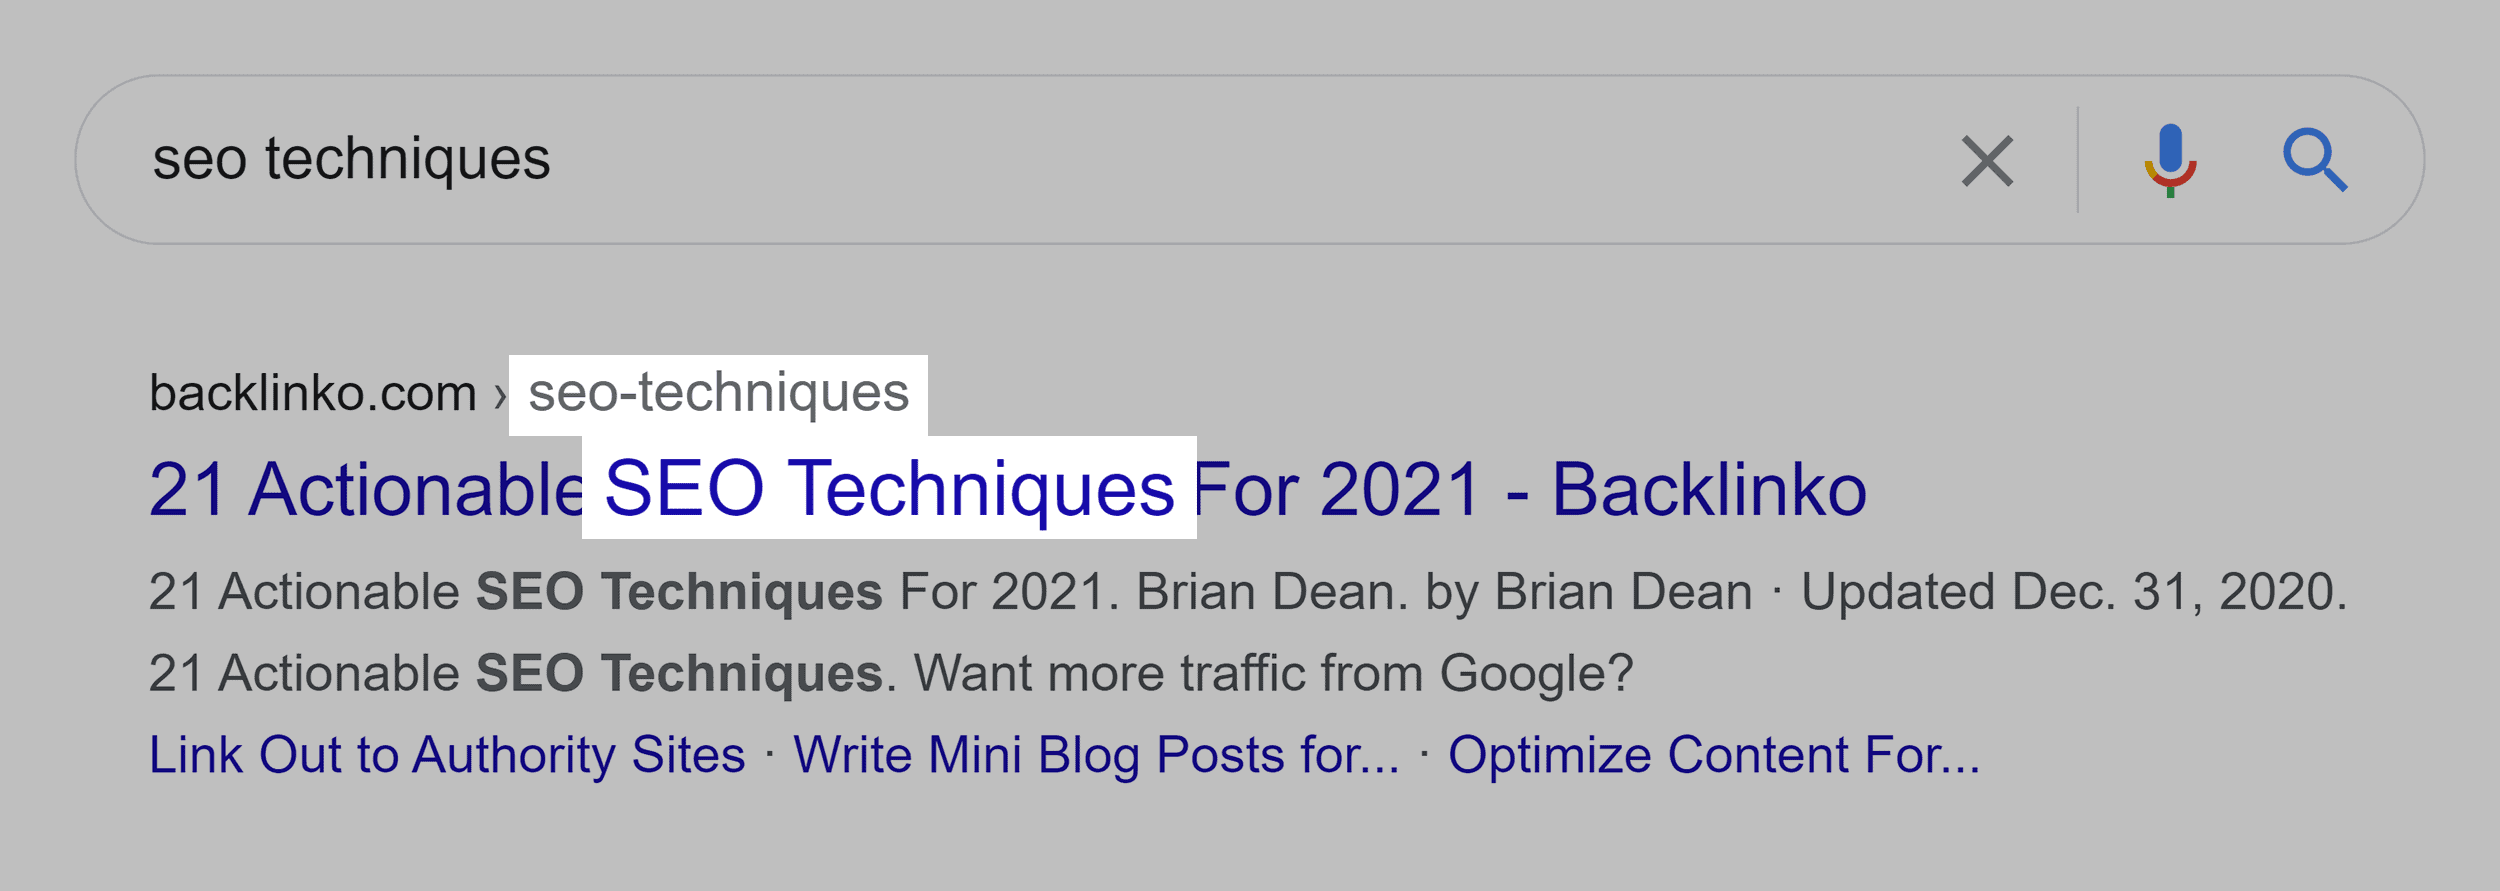 "SEO techniques" keyword in title and URL